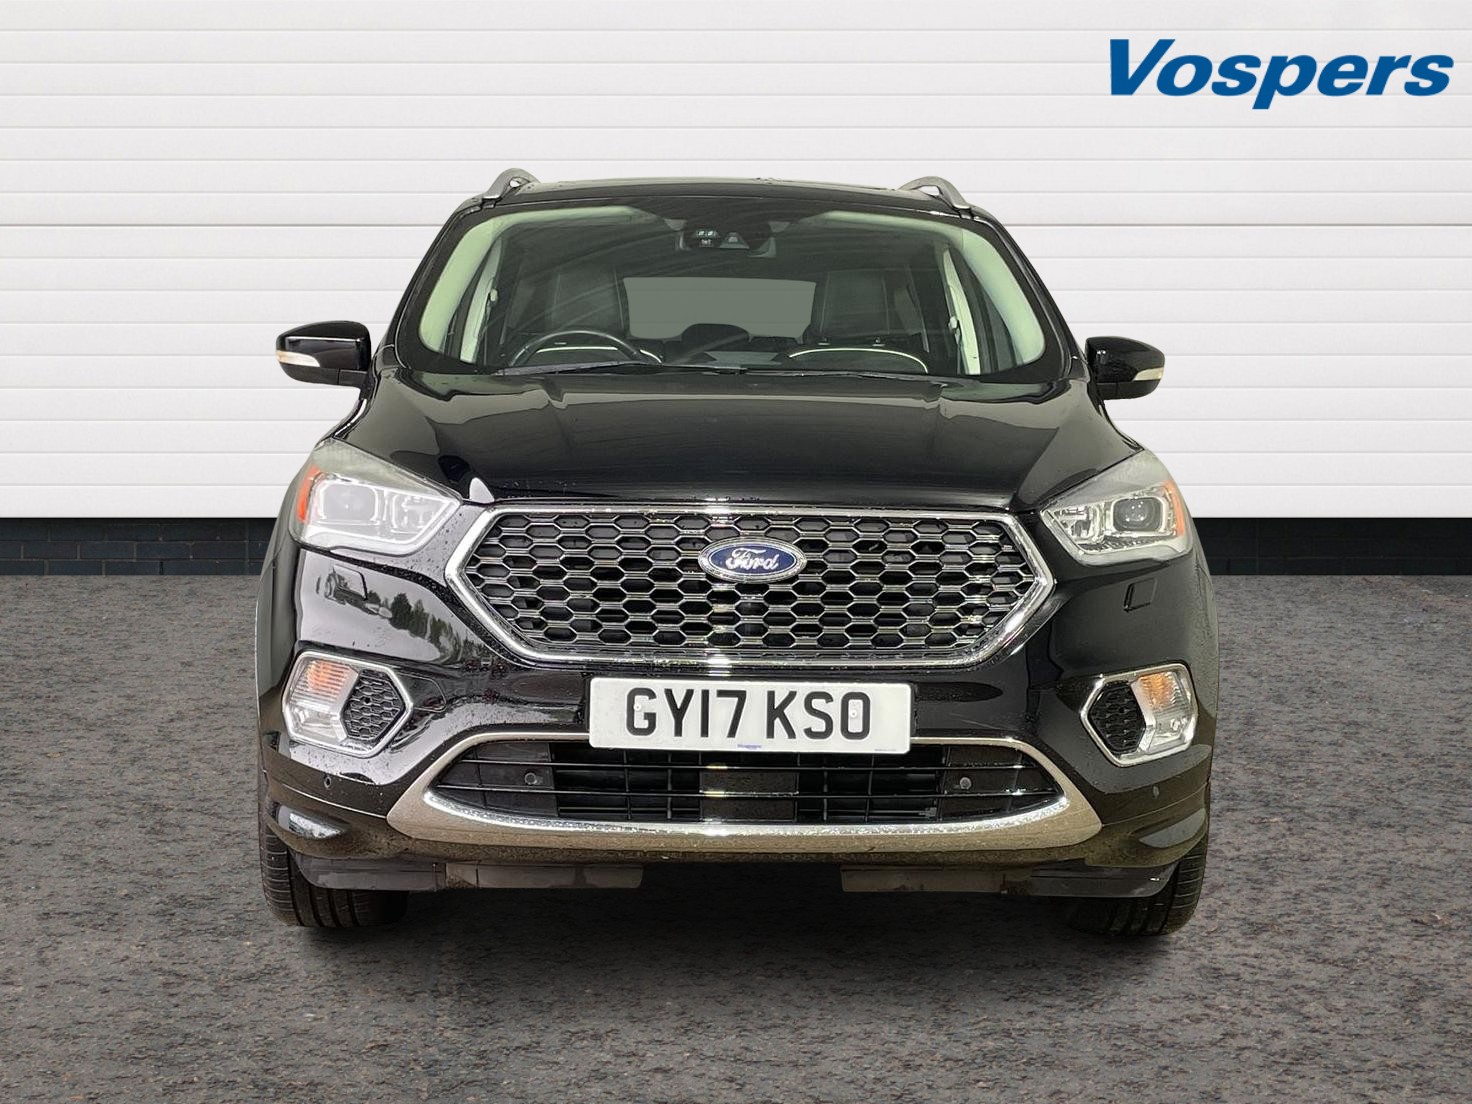 Ford Kuga Vignale 2.0 TDCi 5dr 2WD